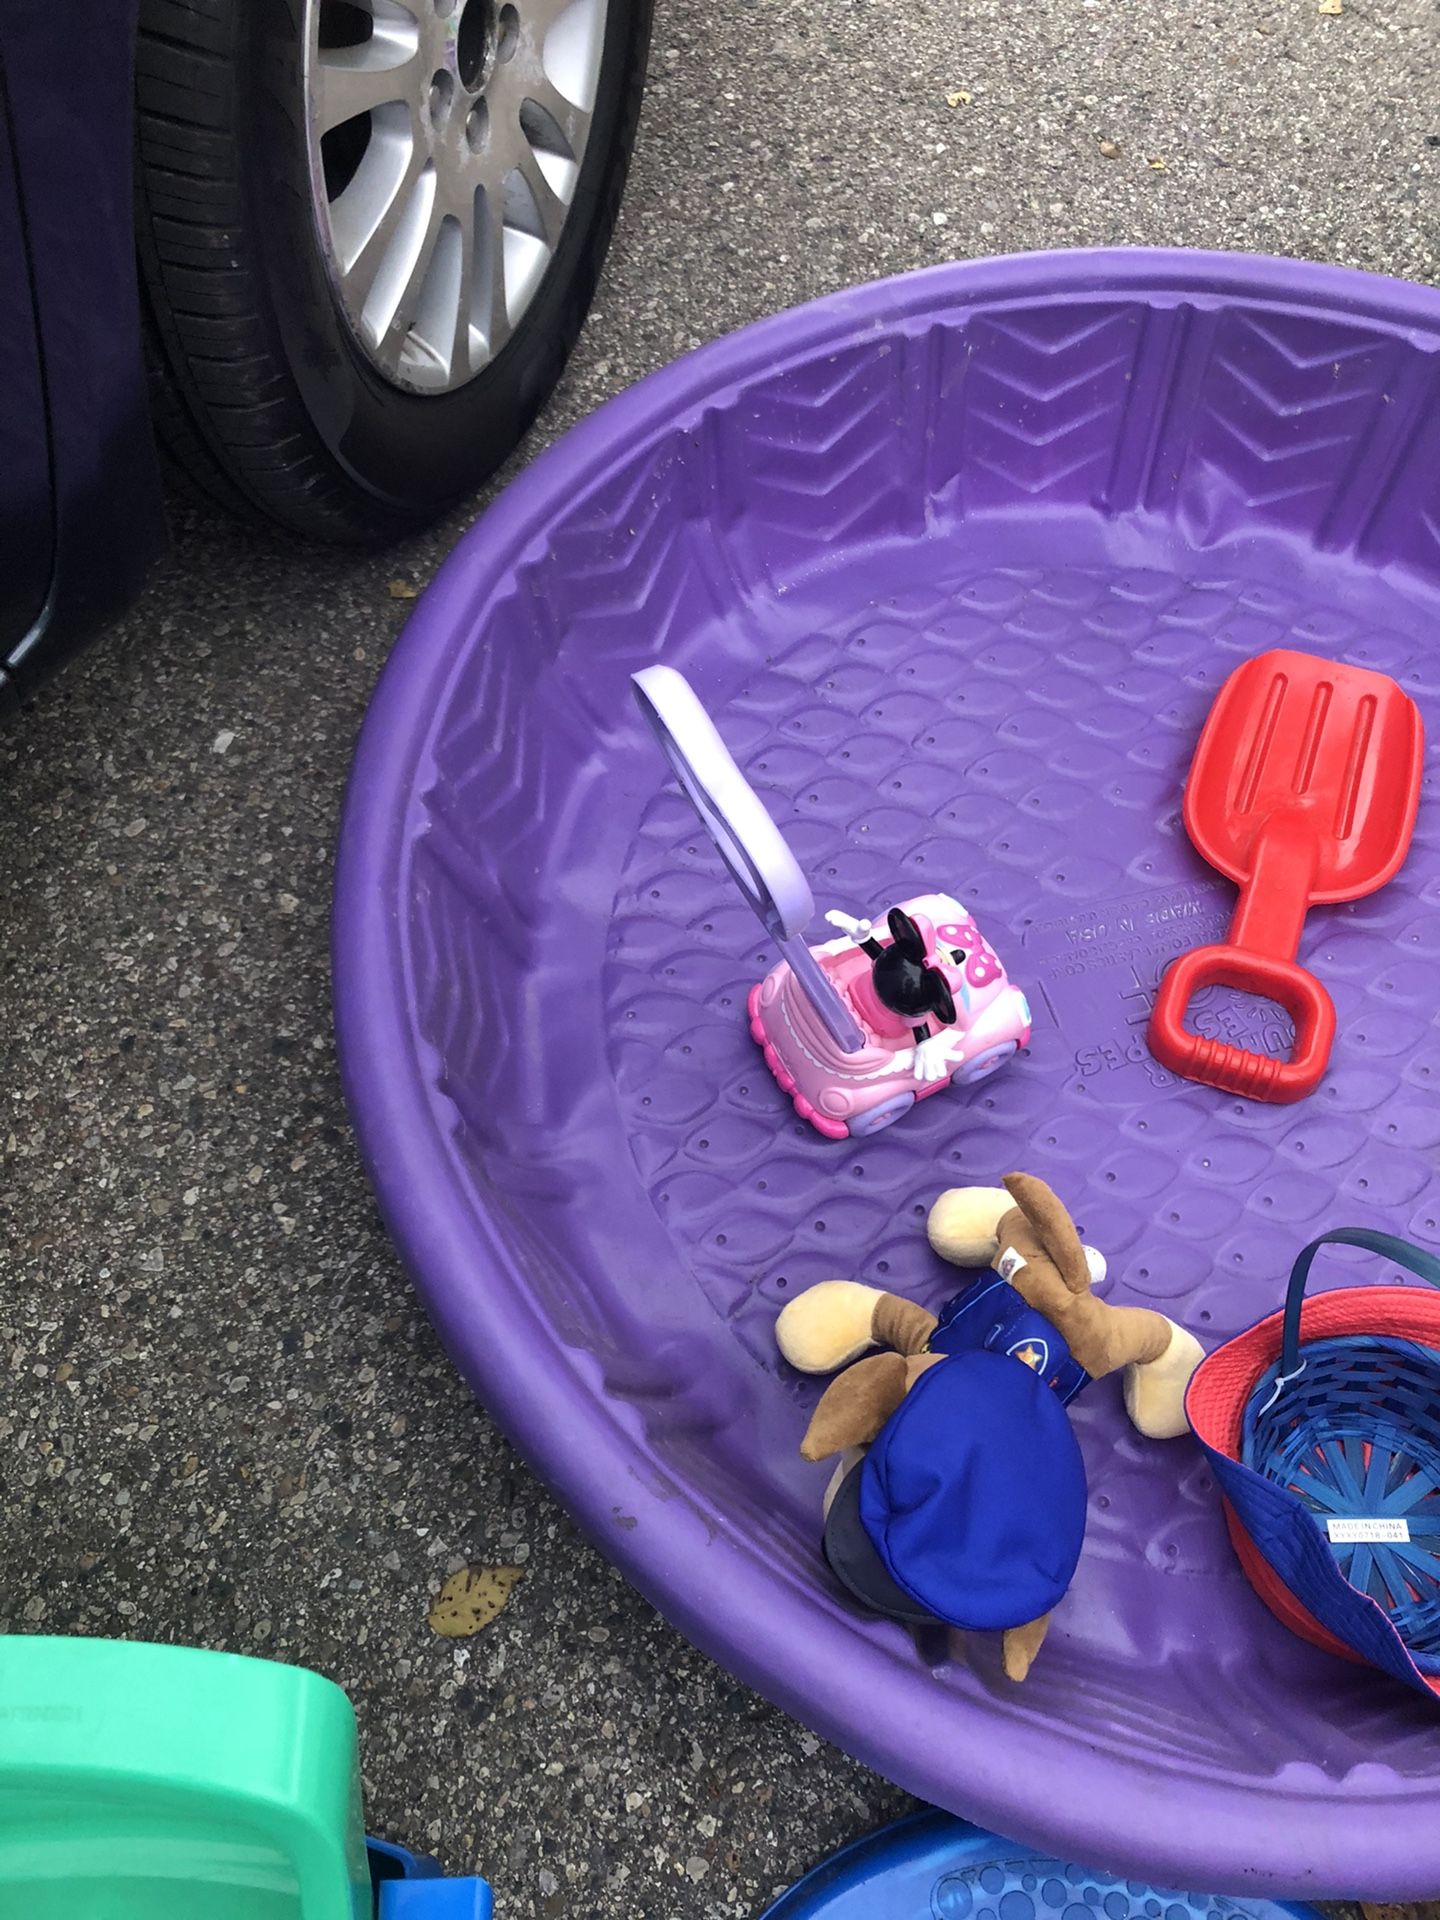 Wagon toy swimming pool everything $20